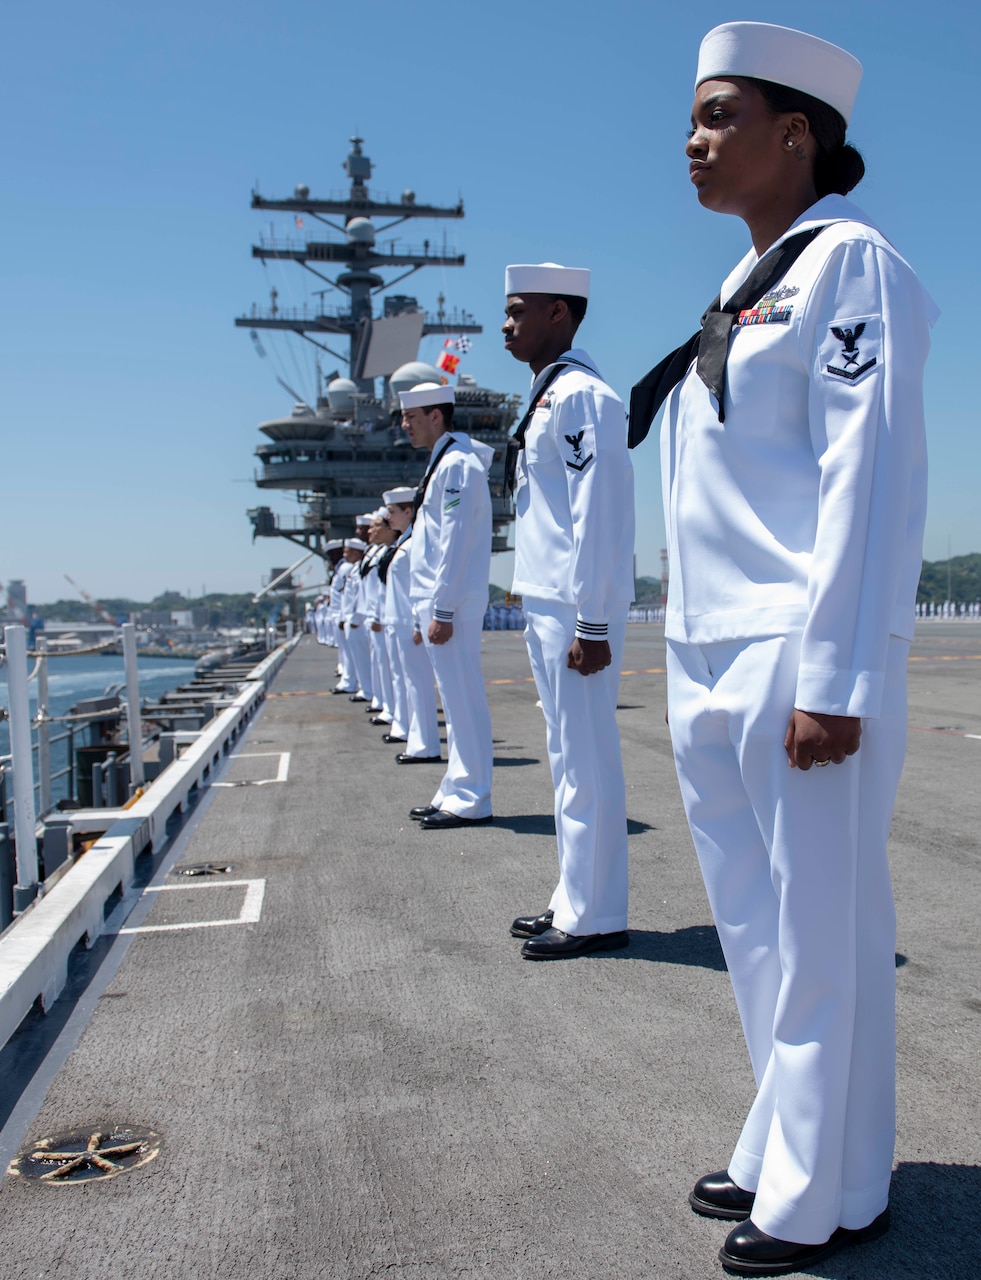 YOKOSUKA, Japan (May. 22, 2019) Sailors man the rails as the Navy’s forward-deployed aircraft carrier USS Ronald Reagan (CVN 76), as the ship departs Commander, Fleet Activities Yokosuka for underway operations. Ronald Reagan provides a combat-ready force, which protects and defends the collective maritime interests of the U.S. and its allies and partners in the Indo-Pacific region.